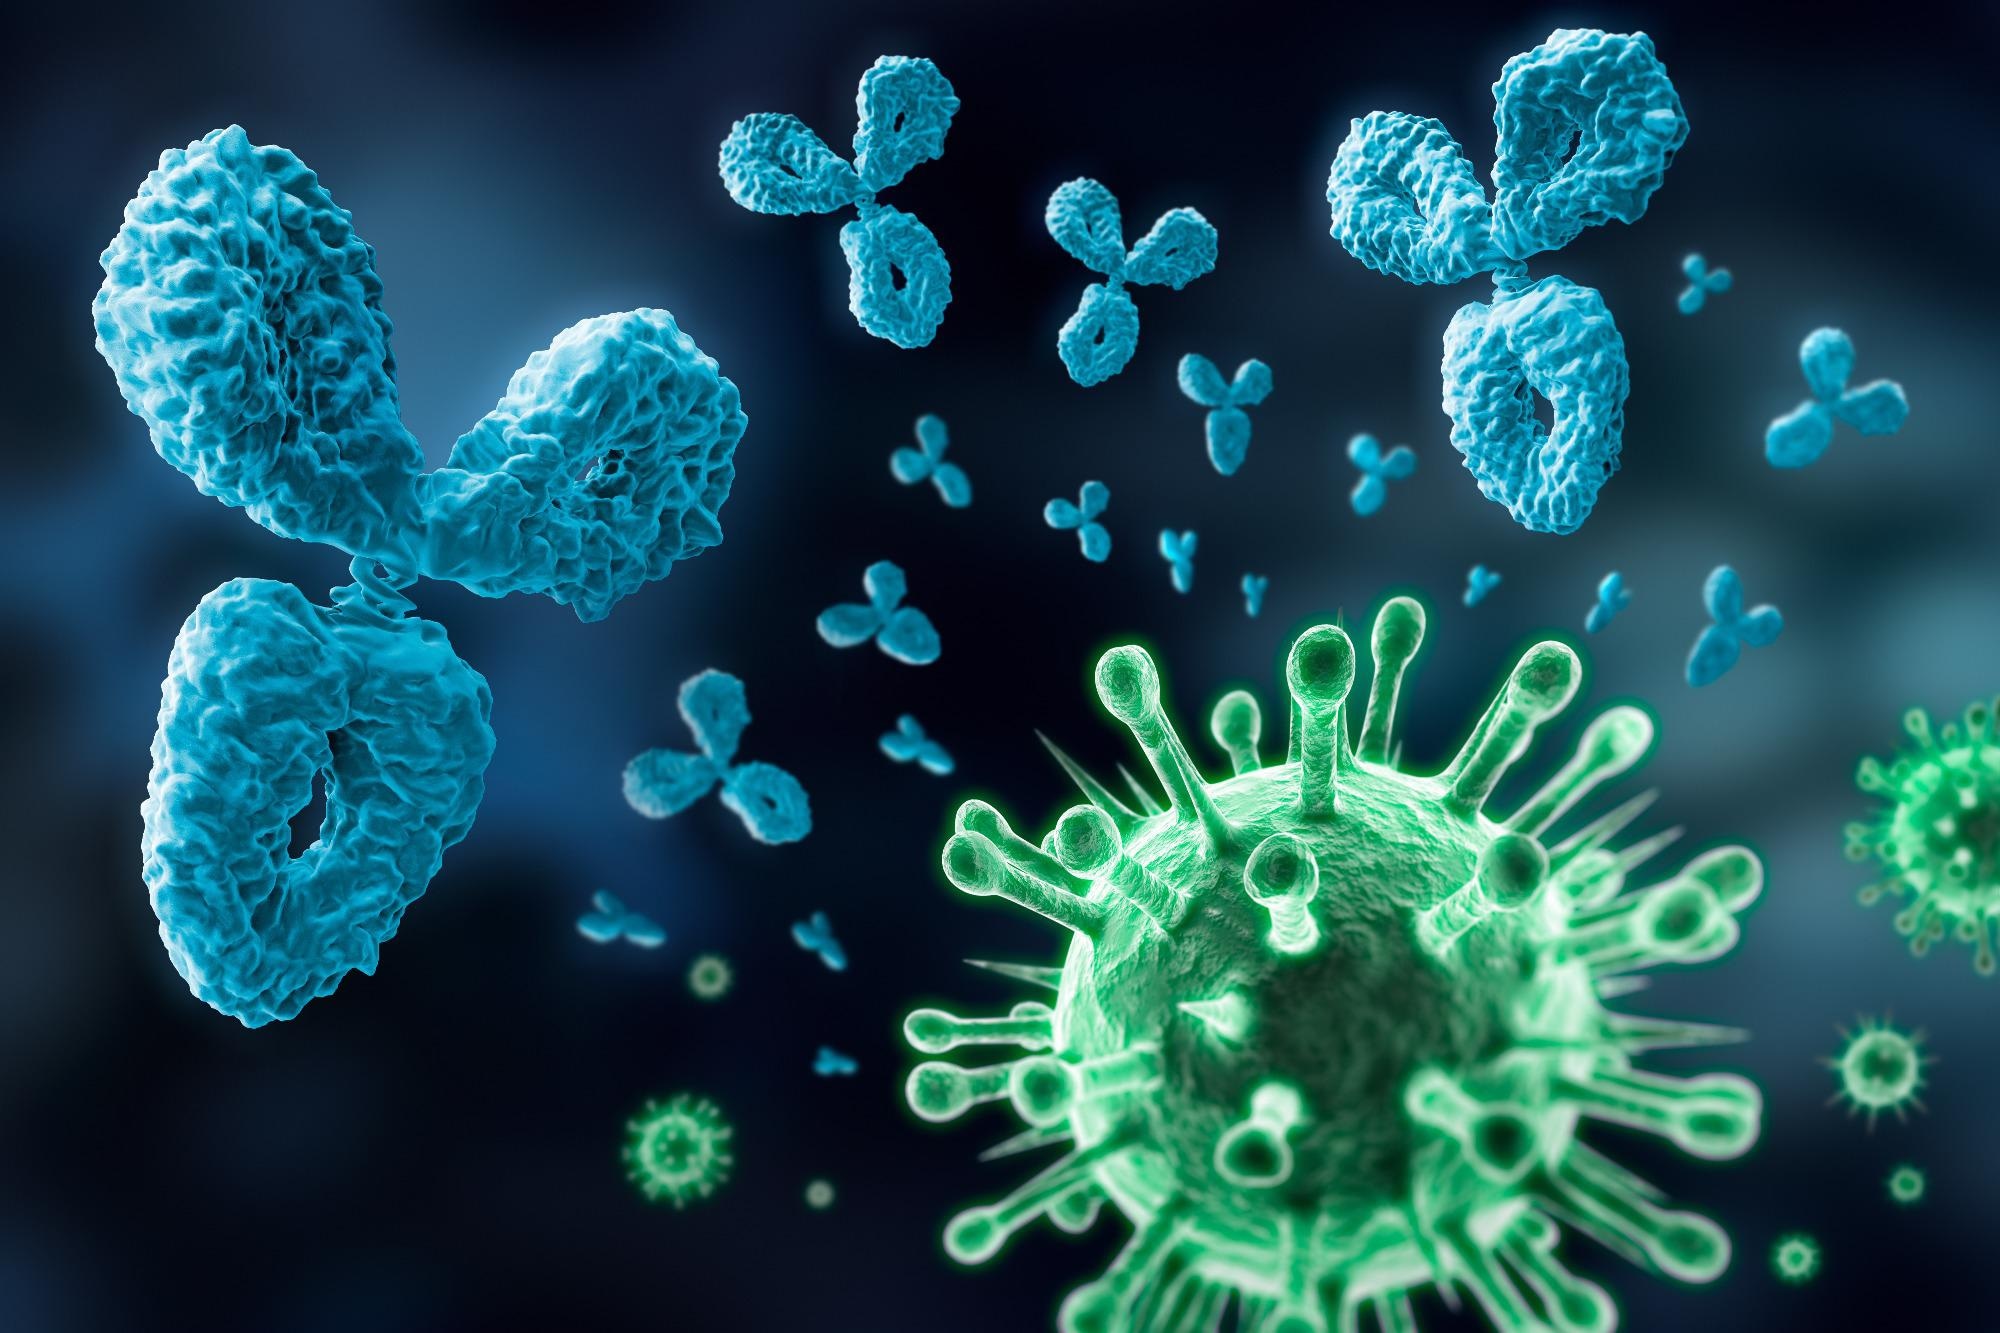 Study: Relationship between SARS-CoV-2 antibody titer and the severity of COVID-19. Image Credit: peterschreiber.media/ / Shutterstock